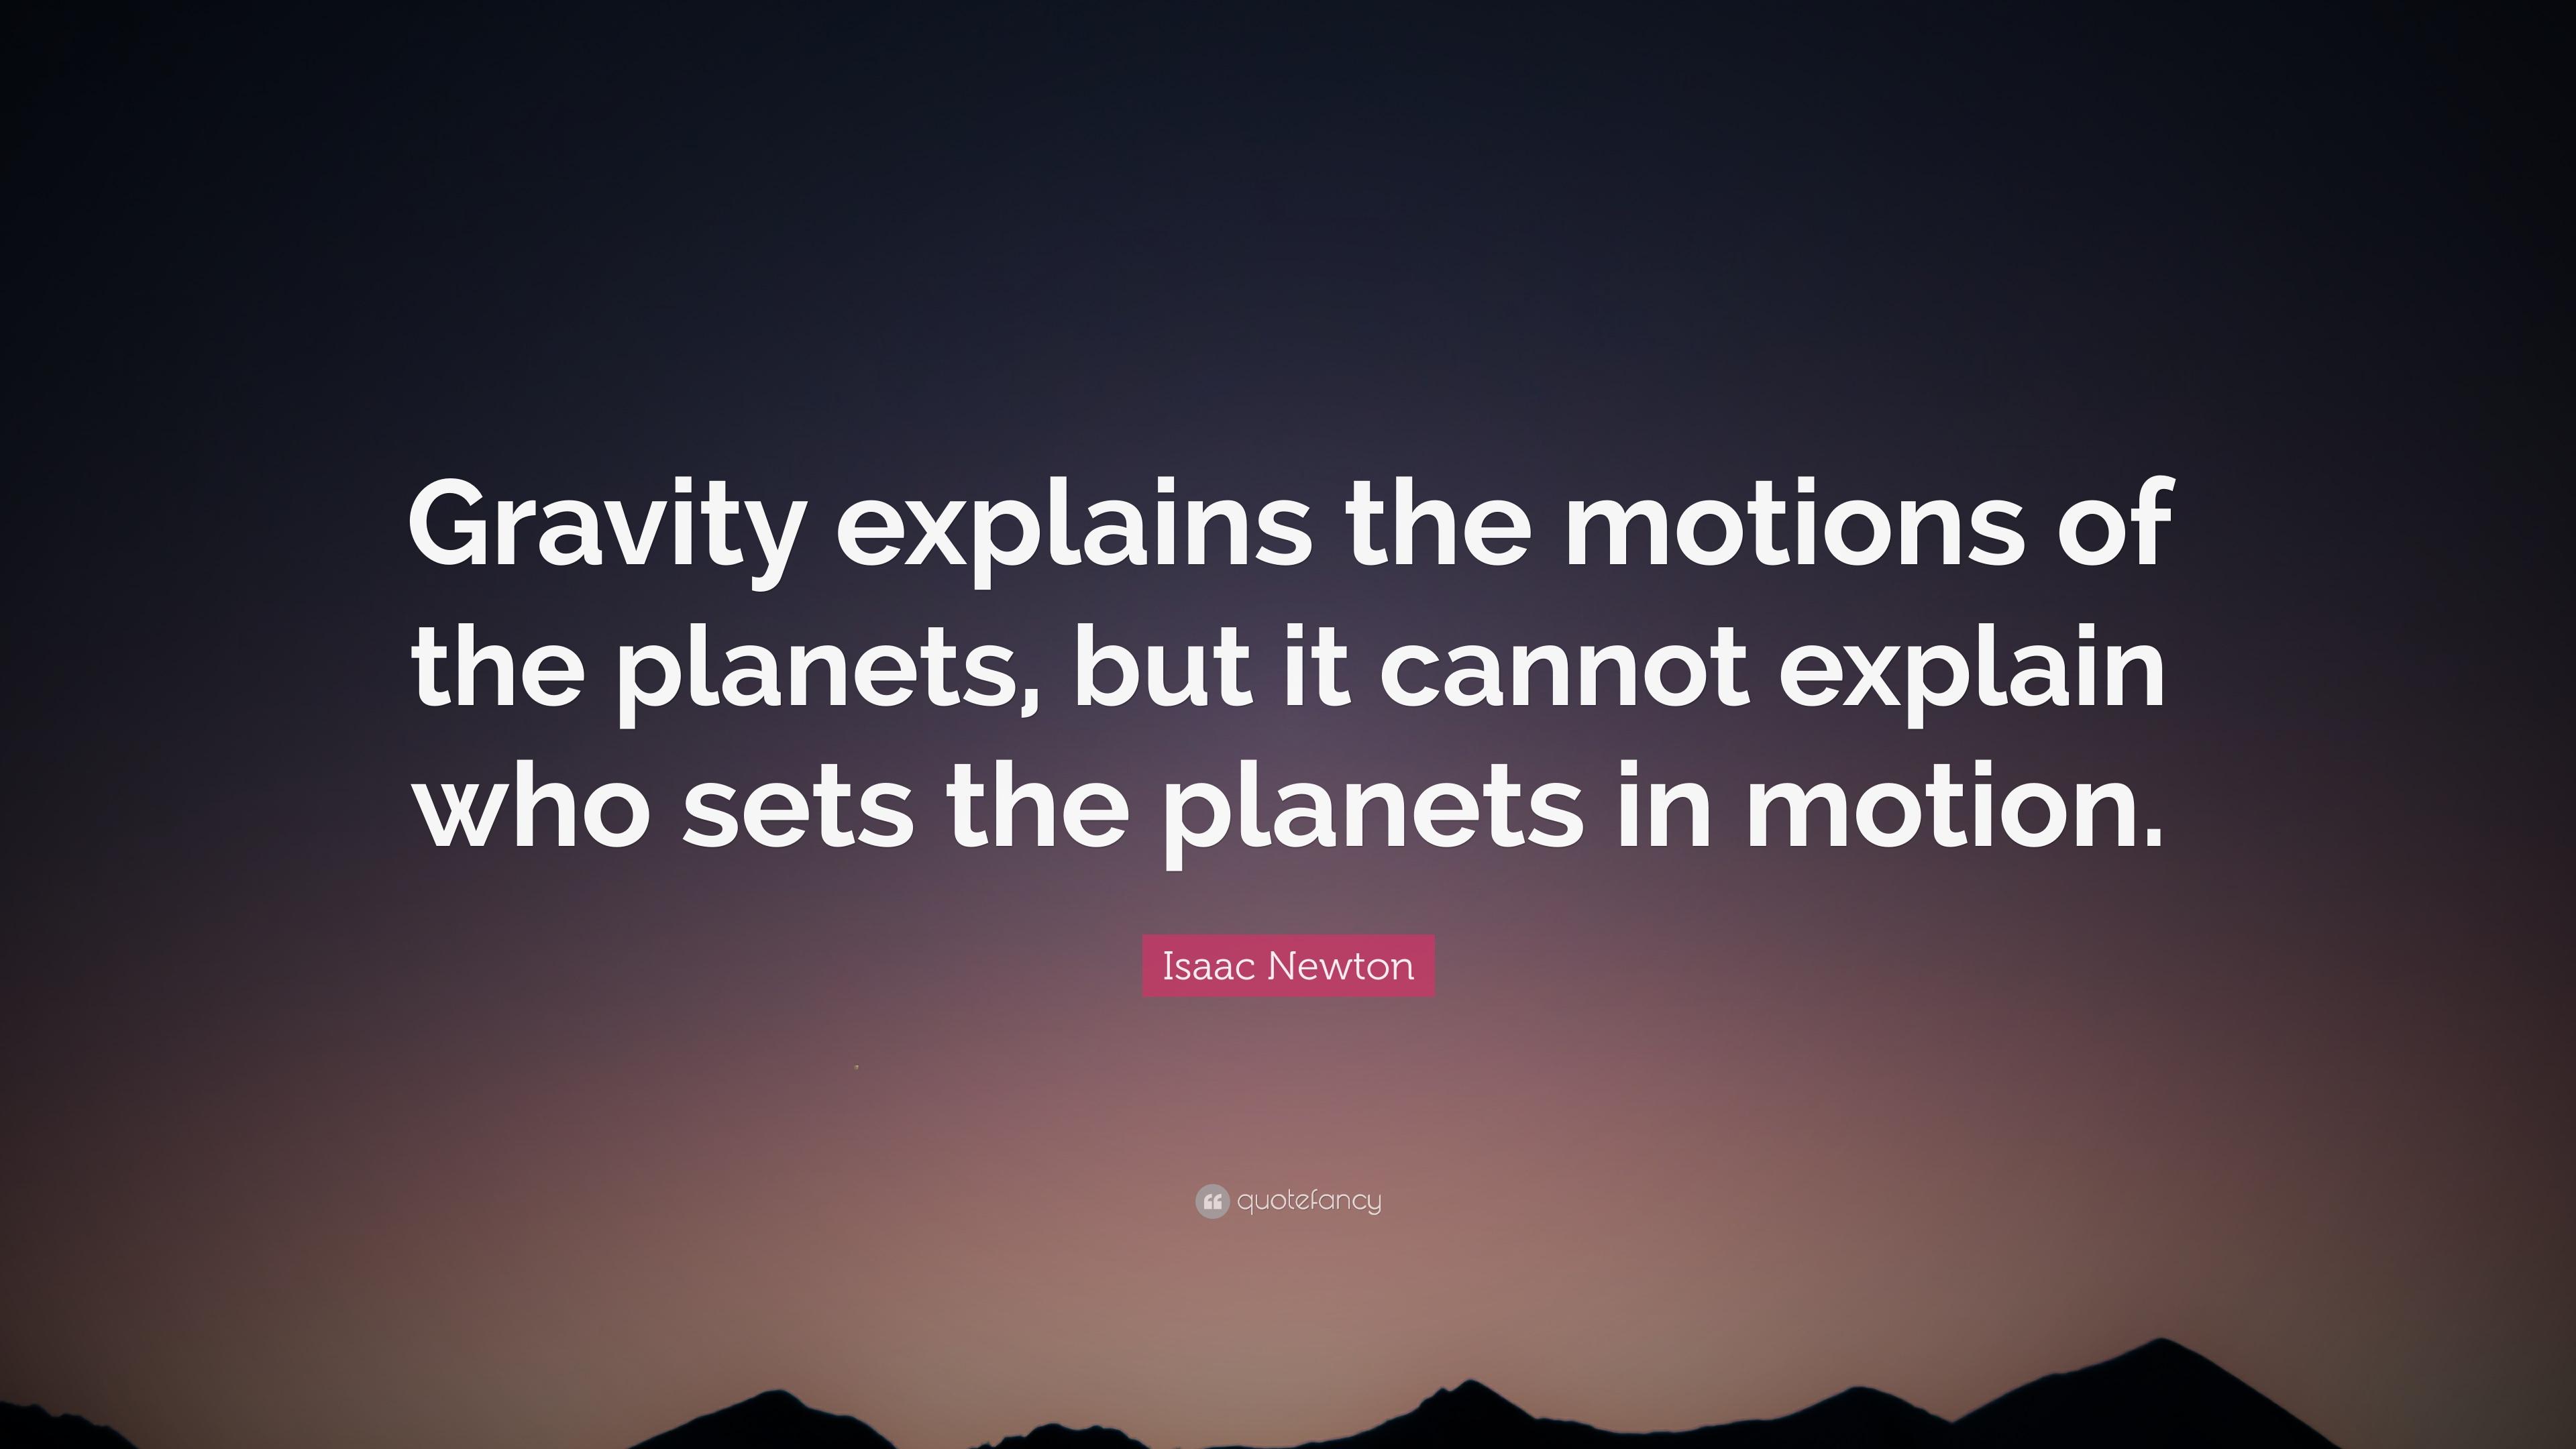 Isaac Newton Quote: “Gravity explains the motions of the planets